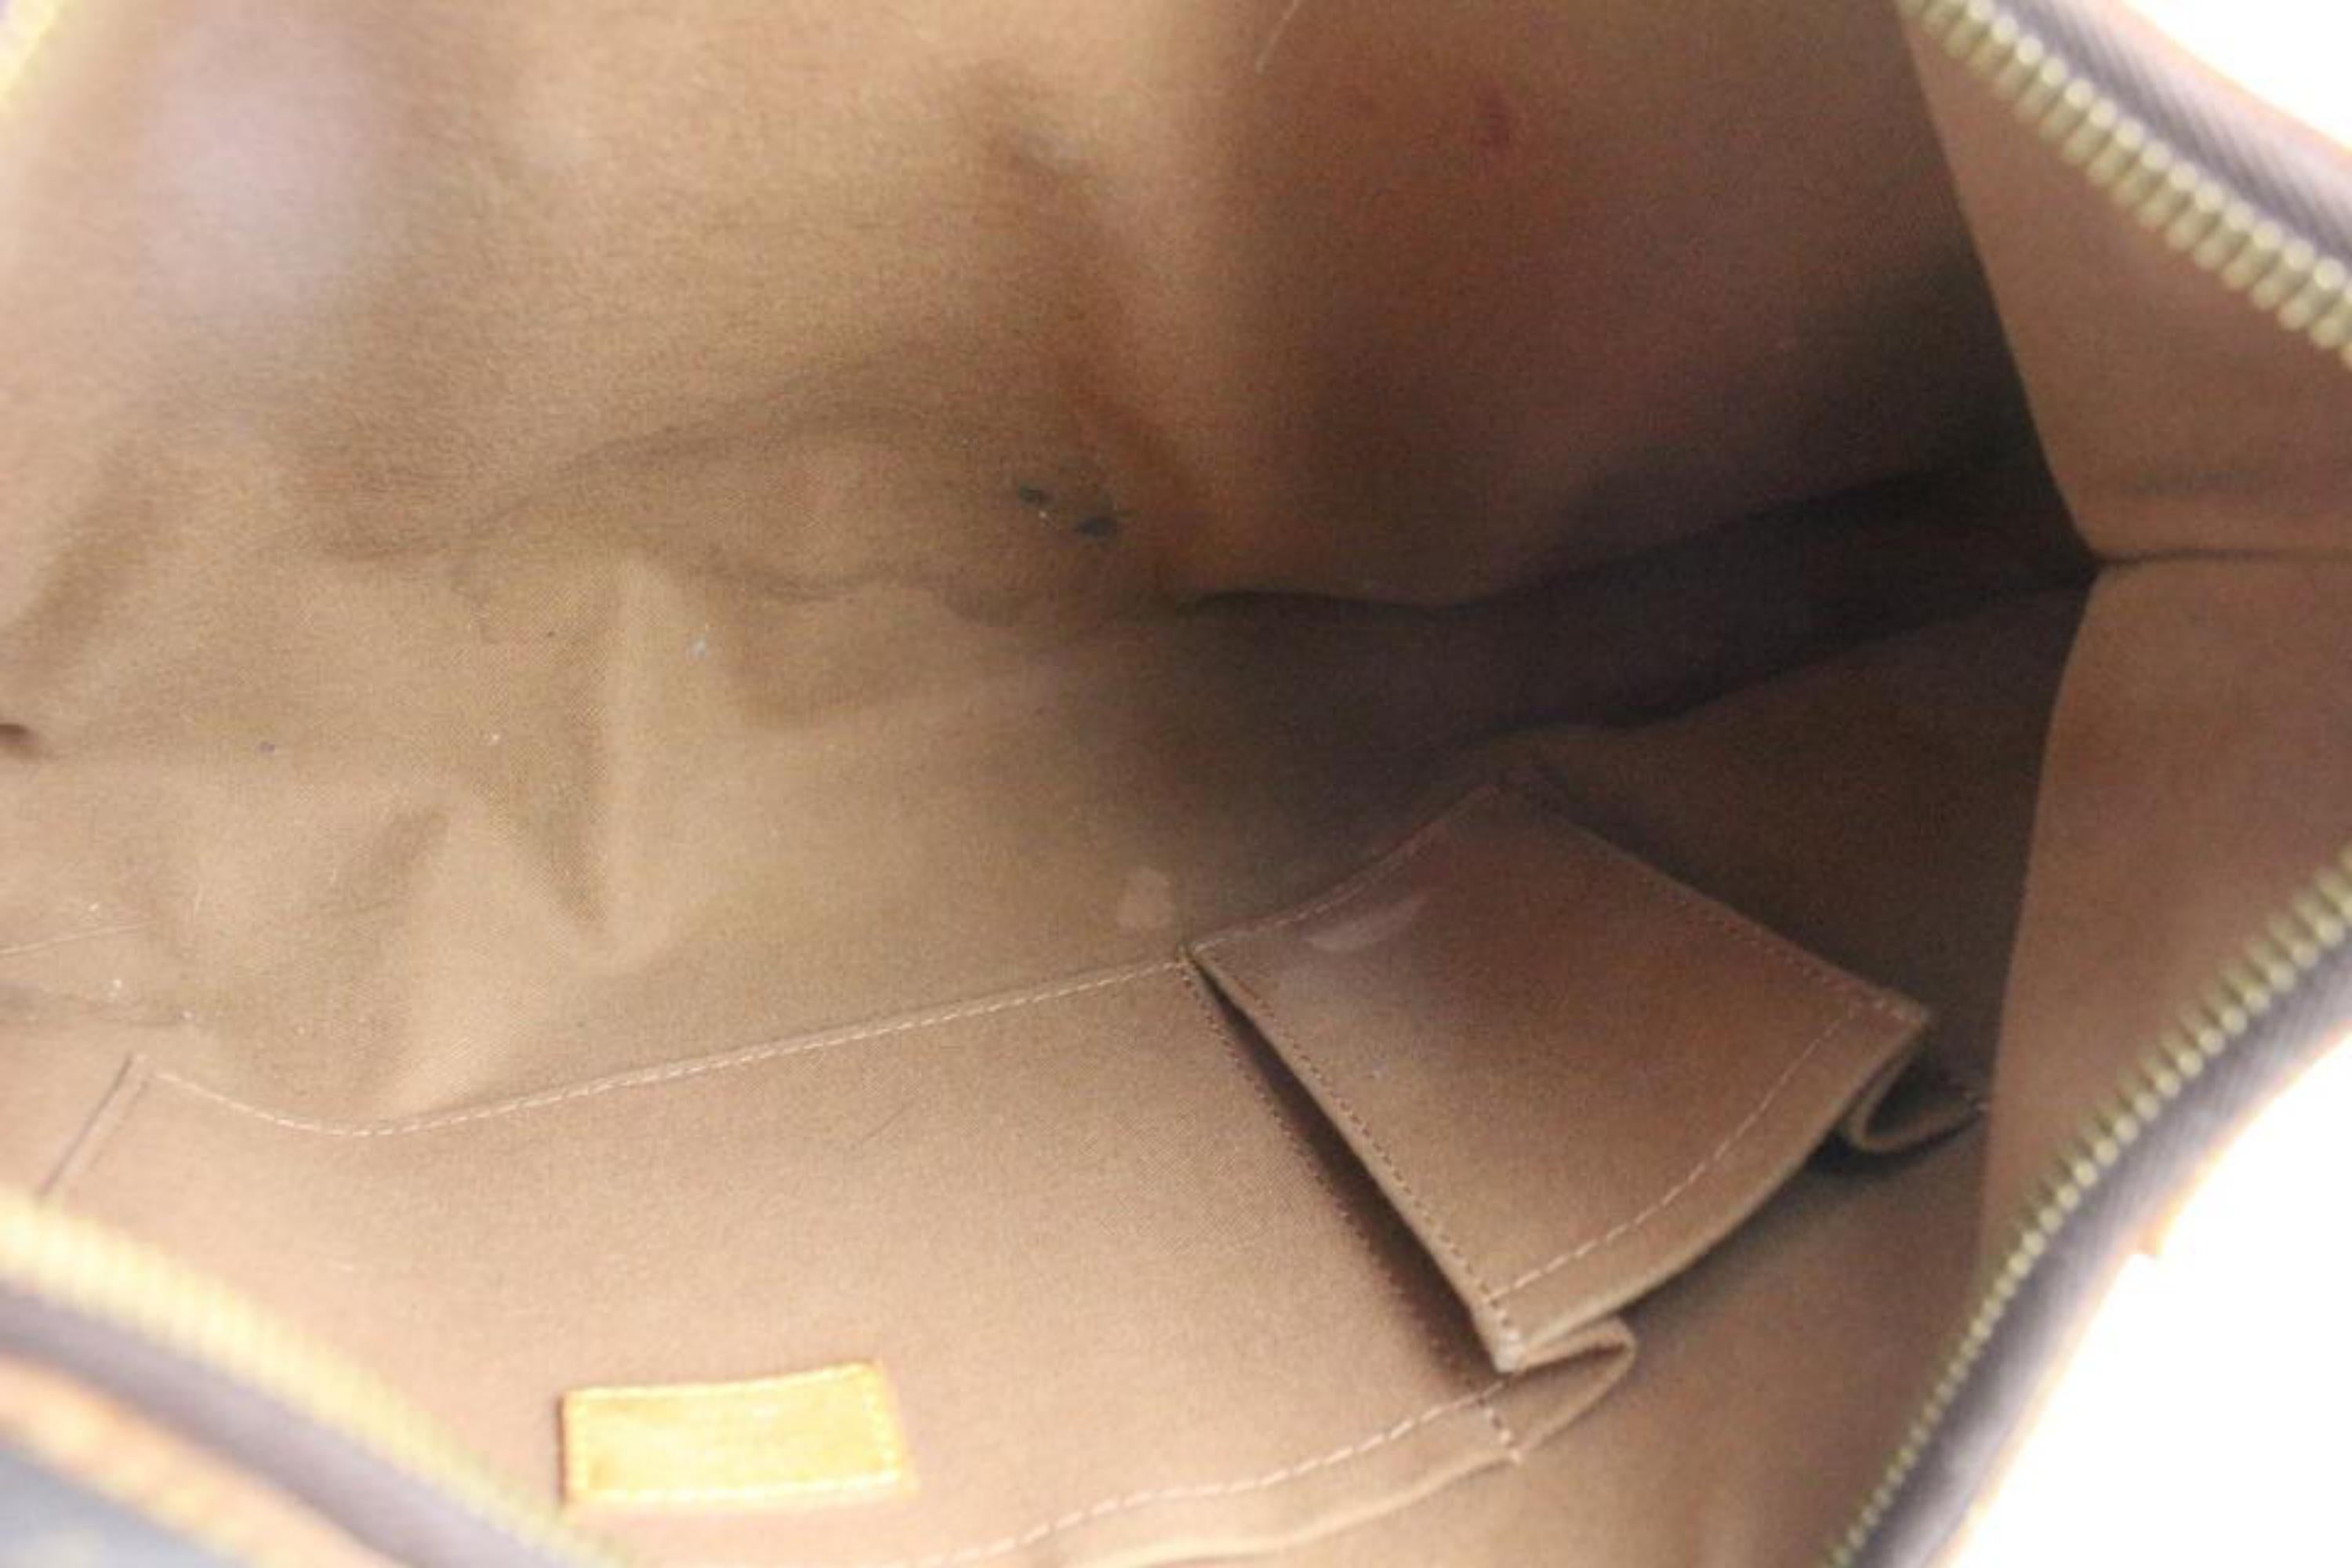 Louis Vuitton Thames Monogram Gm 32lr0501 Brown Coated Canvas Shoulder Bag In Good Condition For Sale In Forest Hills, NY